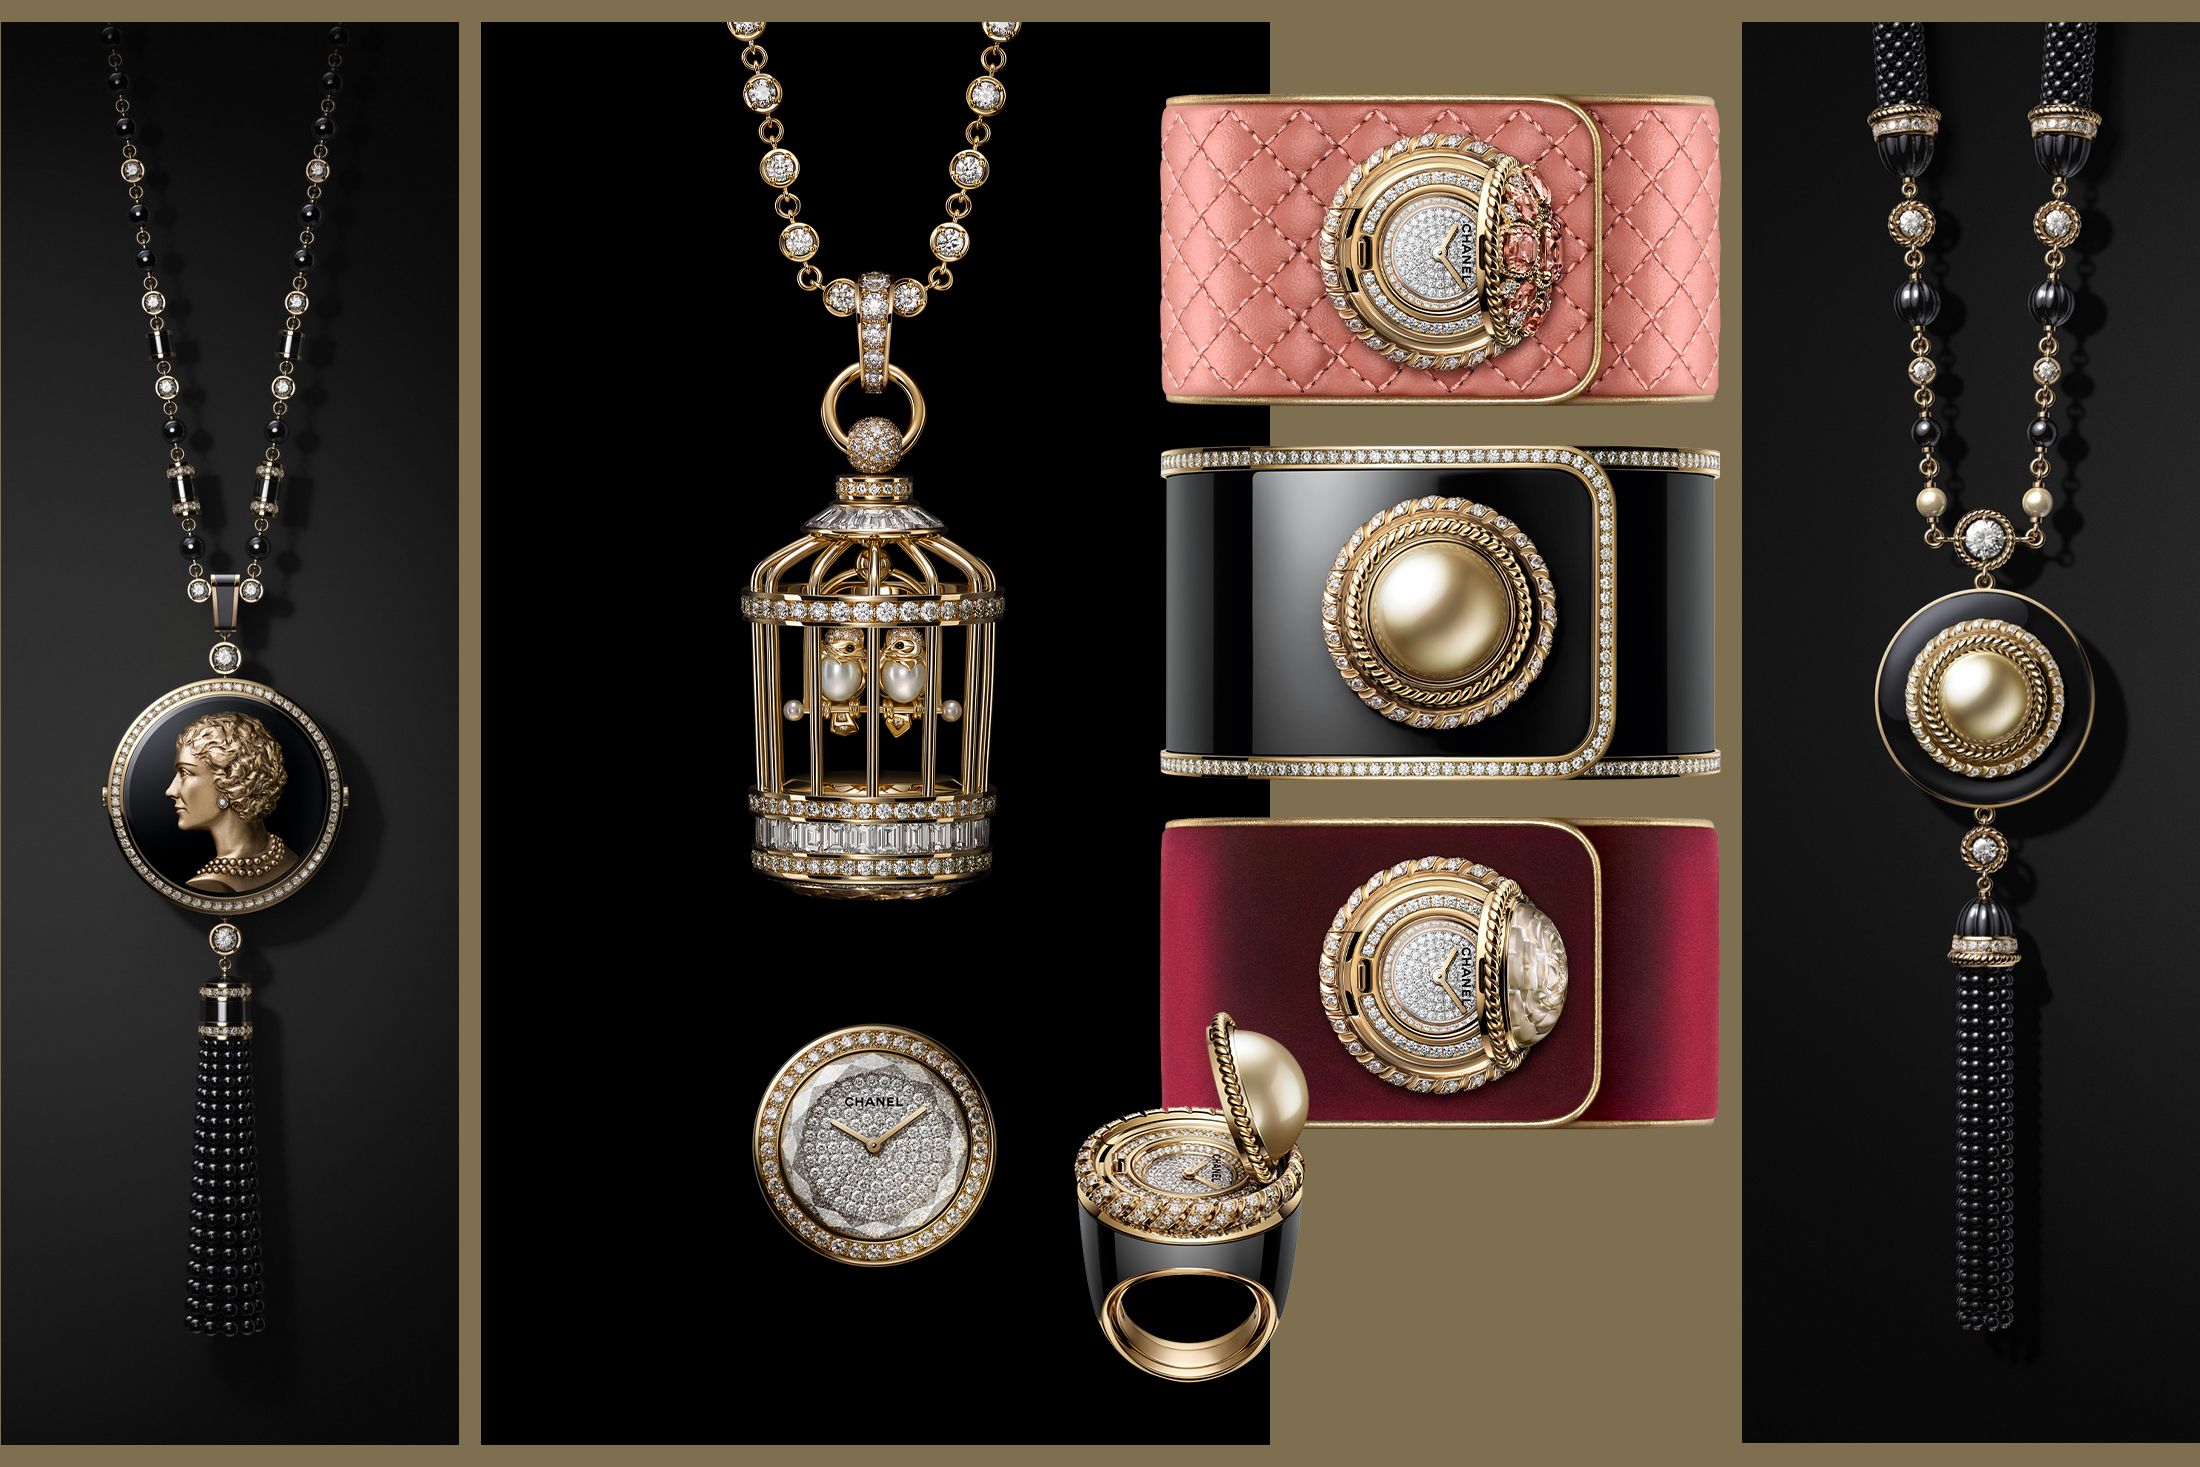 Chanel Mademoiselle Privé Bouton: More Than Meets the Eye | Curatedition